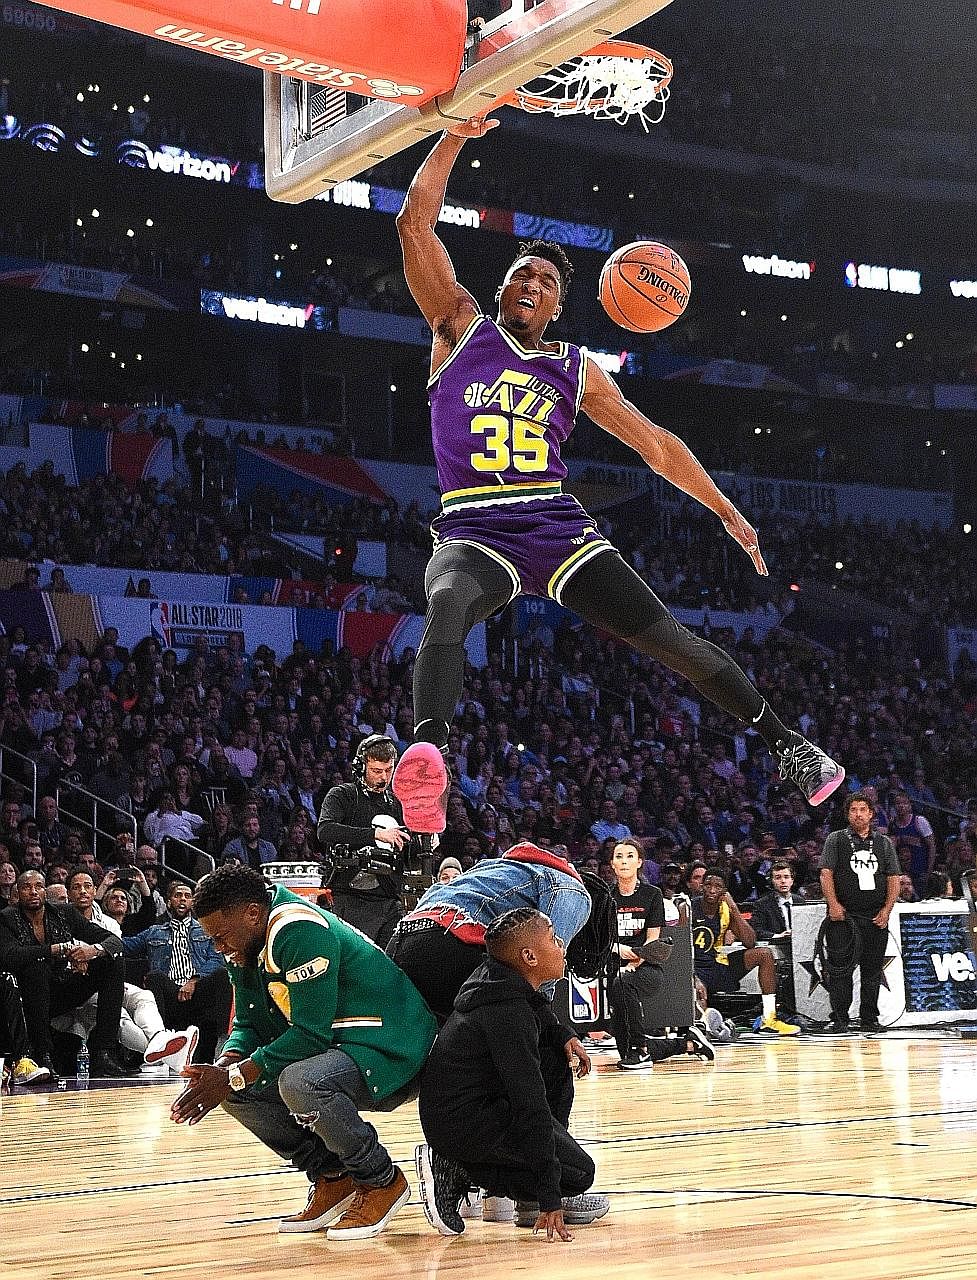 Donovan Mitchell of the Utah Jazz, donning a retro Darrell Griffith Jazz jersey complete with short shorts, soars and dunks over his sister Jordan, American comedian Kevin Hart and his 10-year-old son Hendrix, in his second dunk of the NBA Slam Dunk 